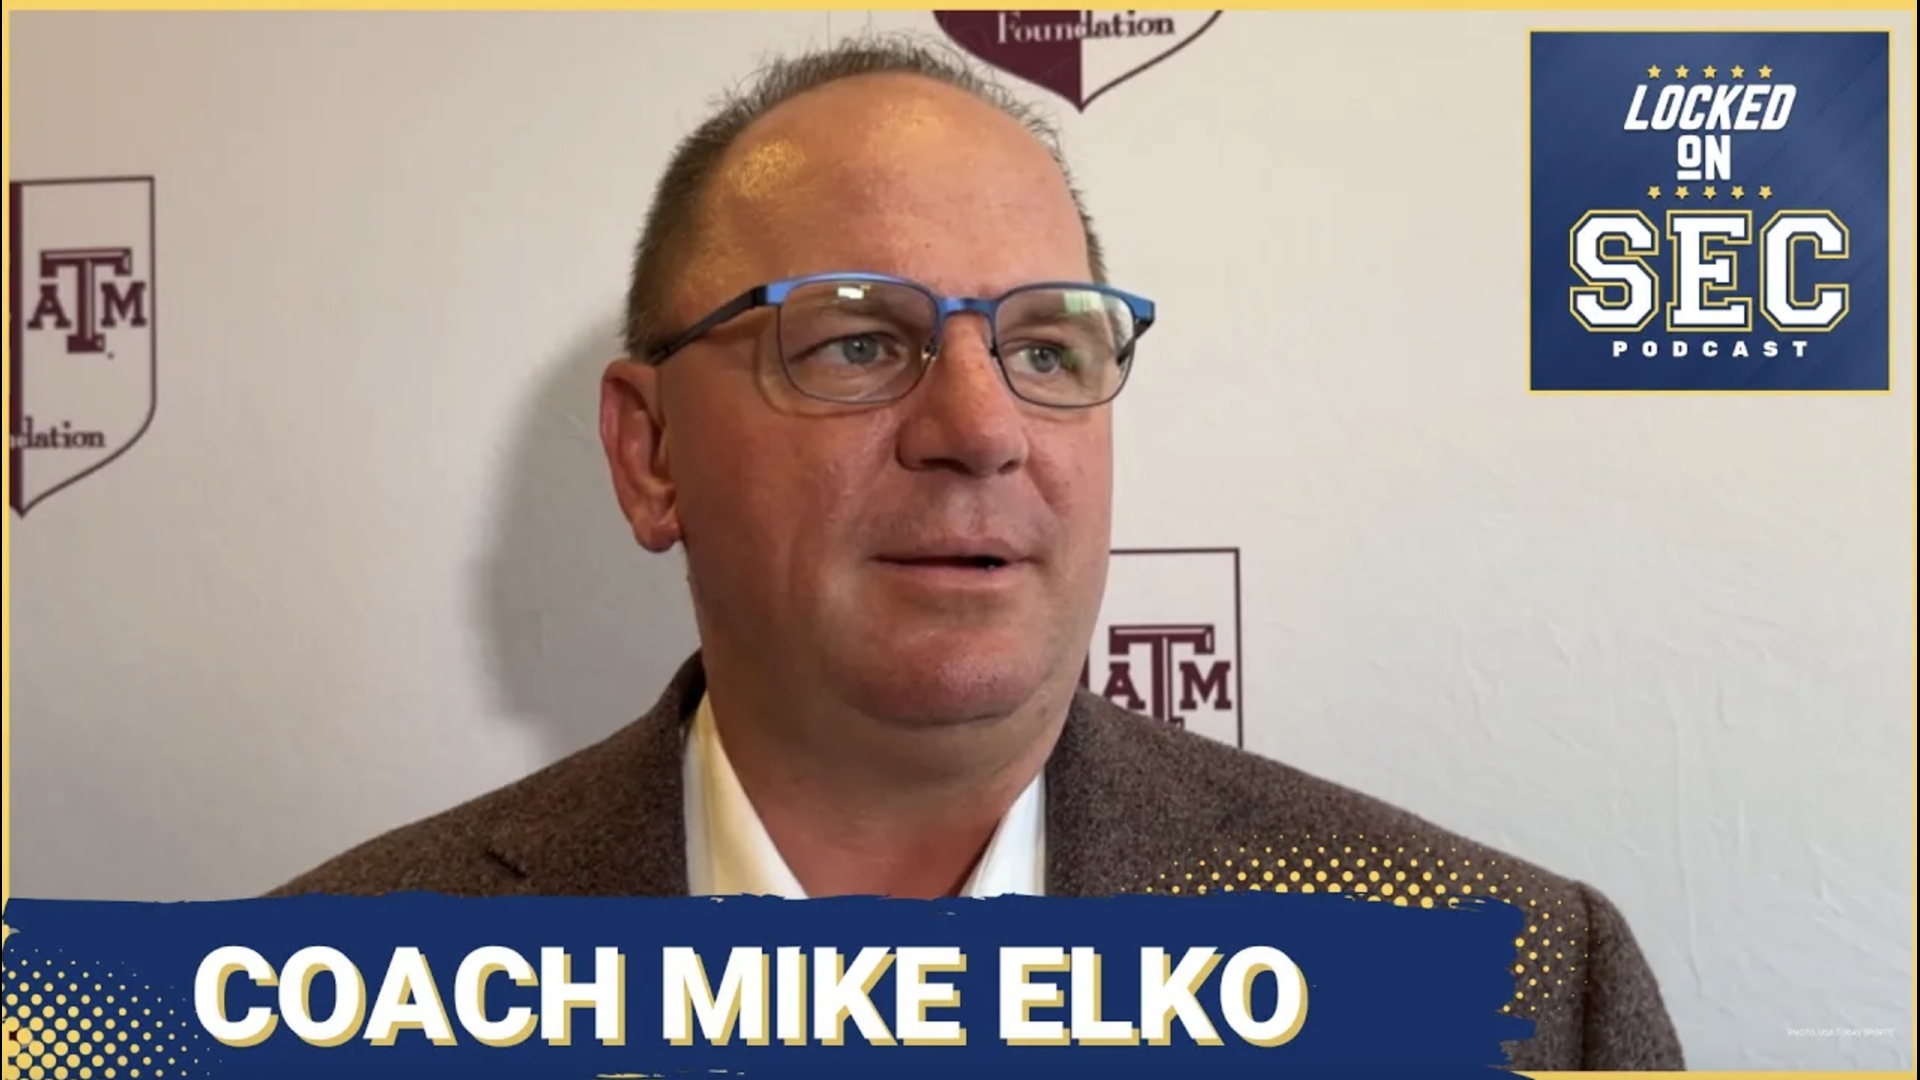 On today's show, we catch up with Texas A&M head coach Mike Elko as he made an appearance at the Aggie Coach's Night